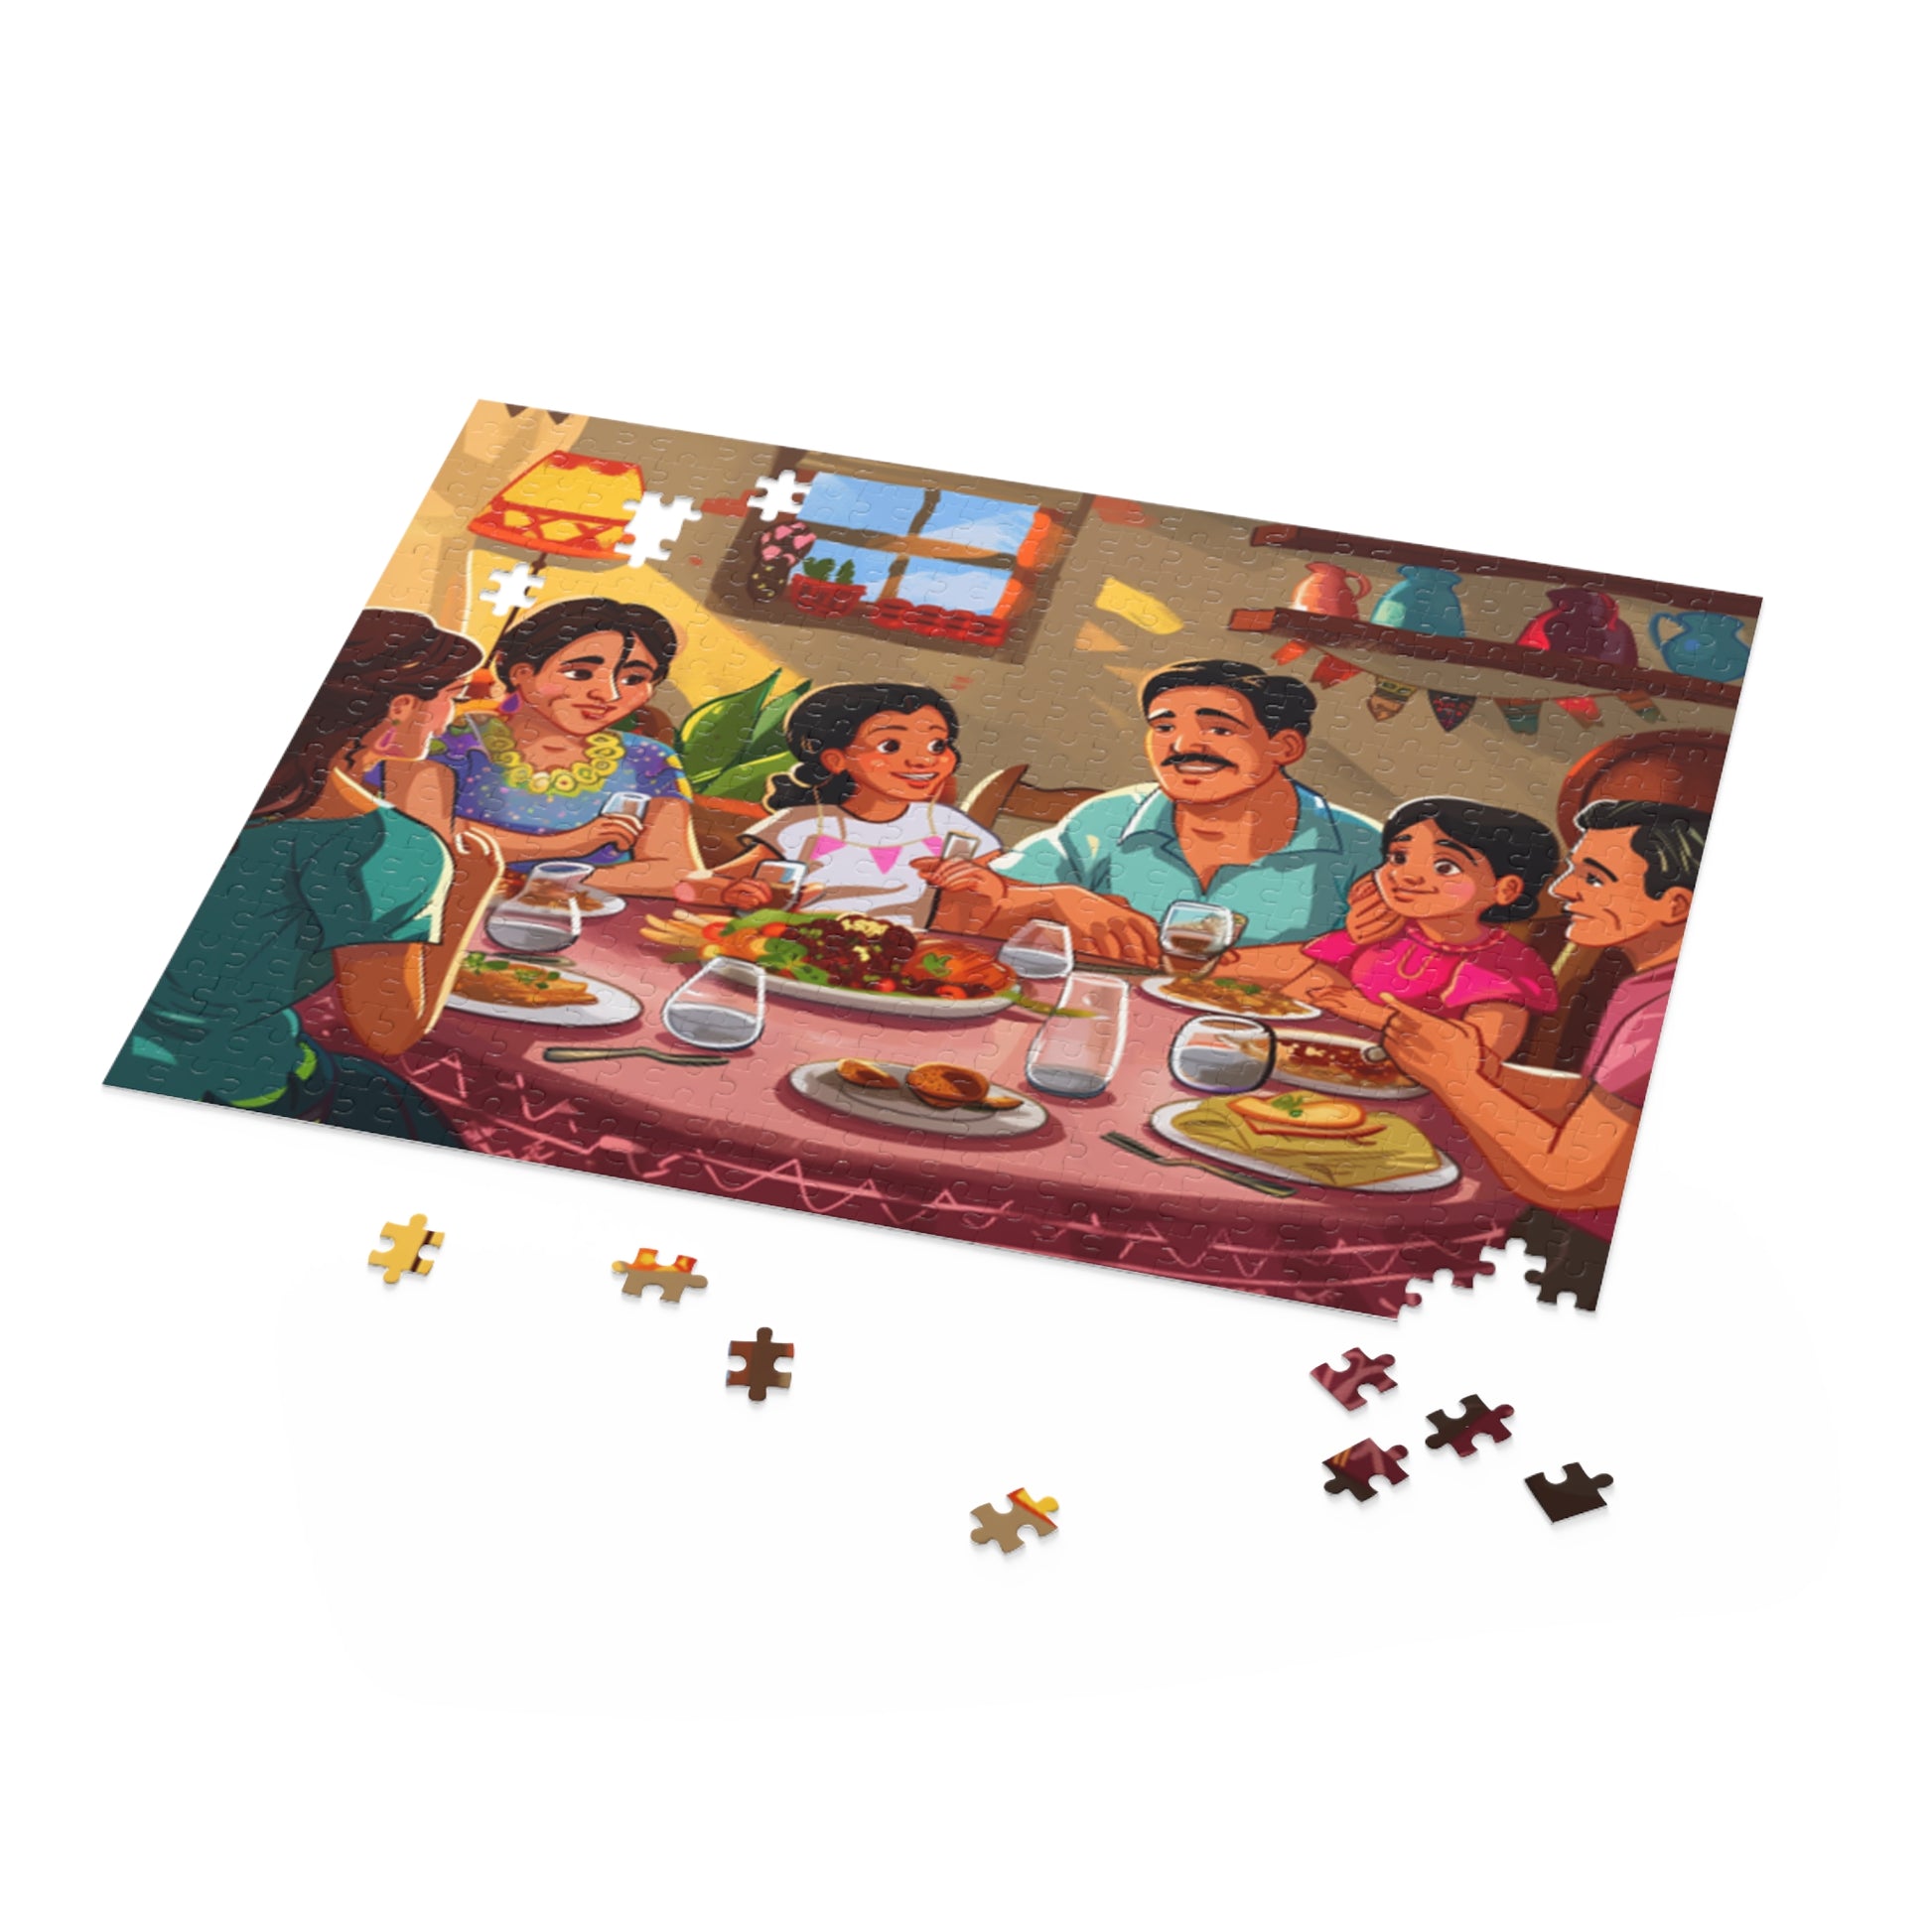 Mexican Art Family Retro Jigsaw Puzzle Adult Birthday Business Jigsaw Puzzle Gift for Him Funny Humorous Indoor Outdoor Game Gift For Her Online-5